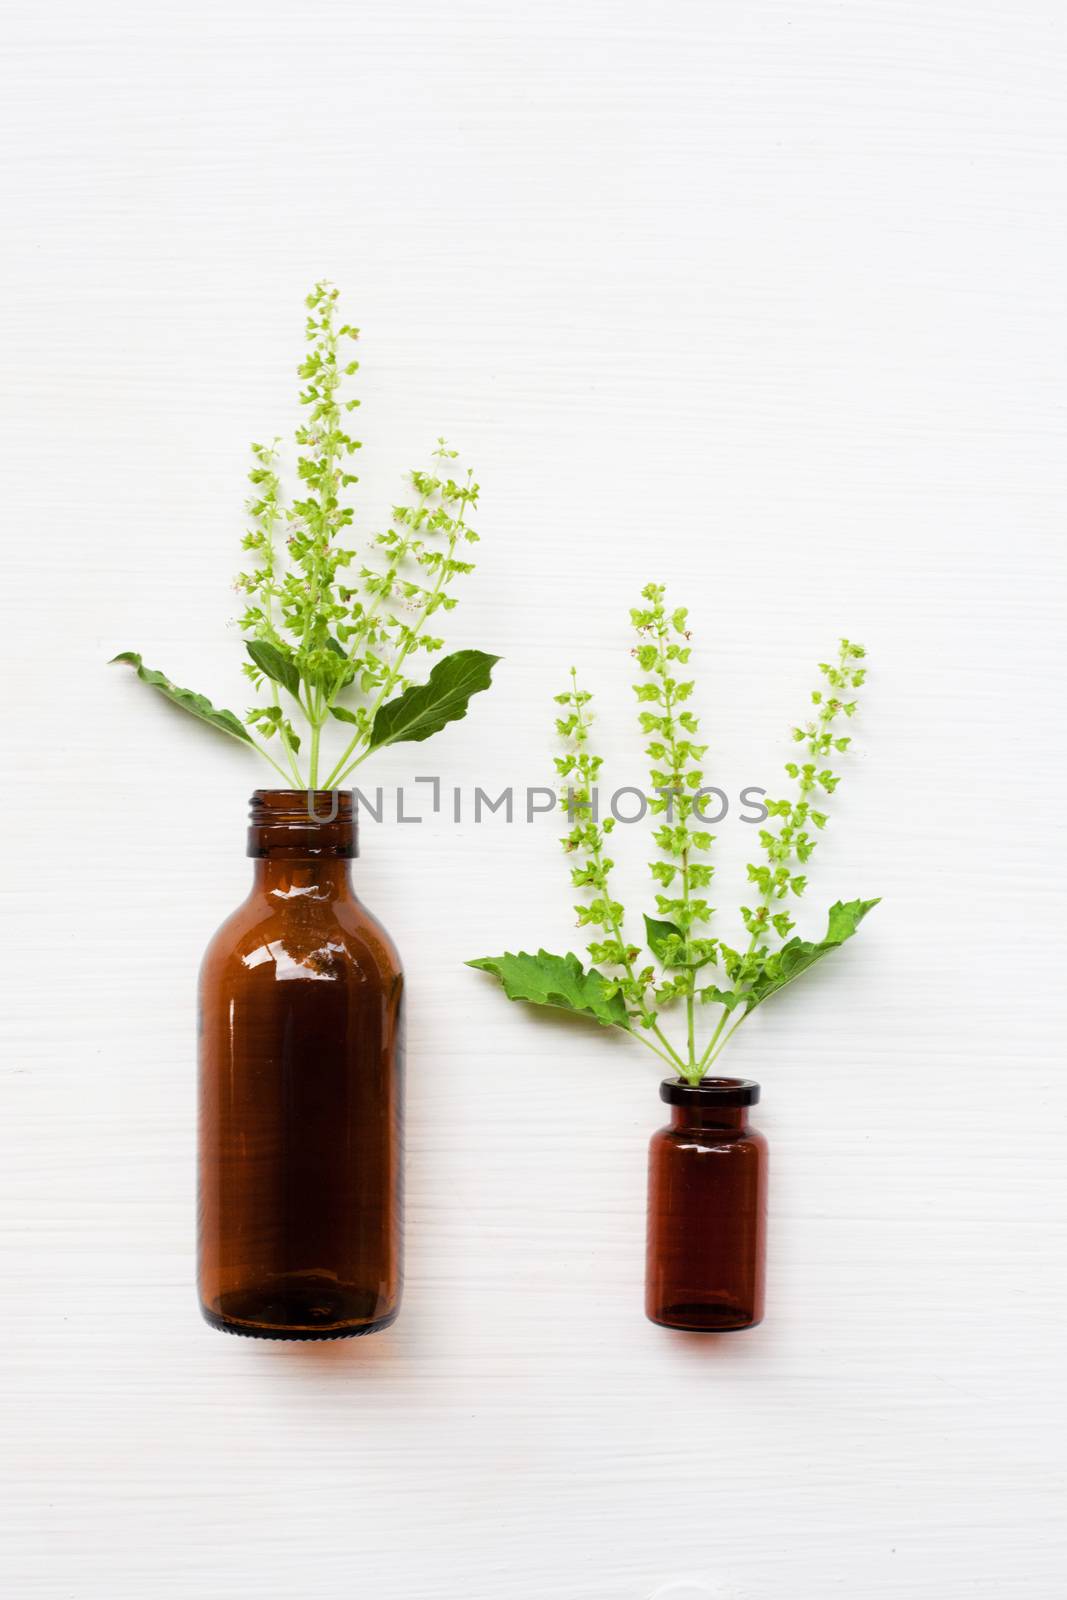 Holy Basil Essential Oil in a Glass Bottle with Fresh Holy Basil flower on white background.